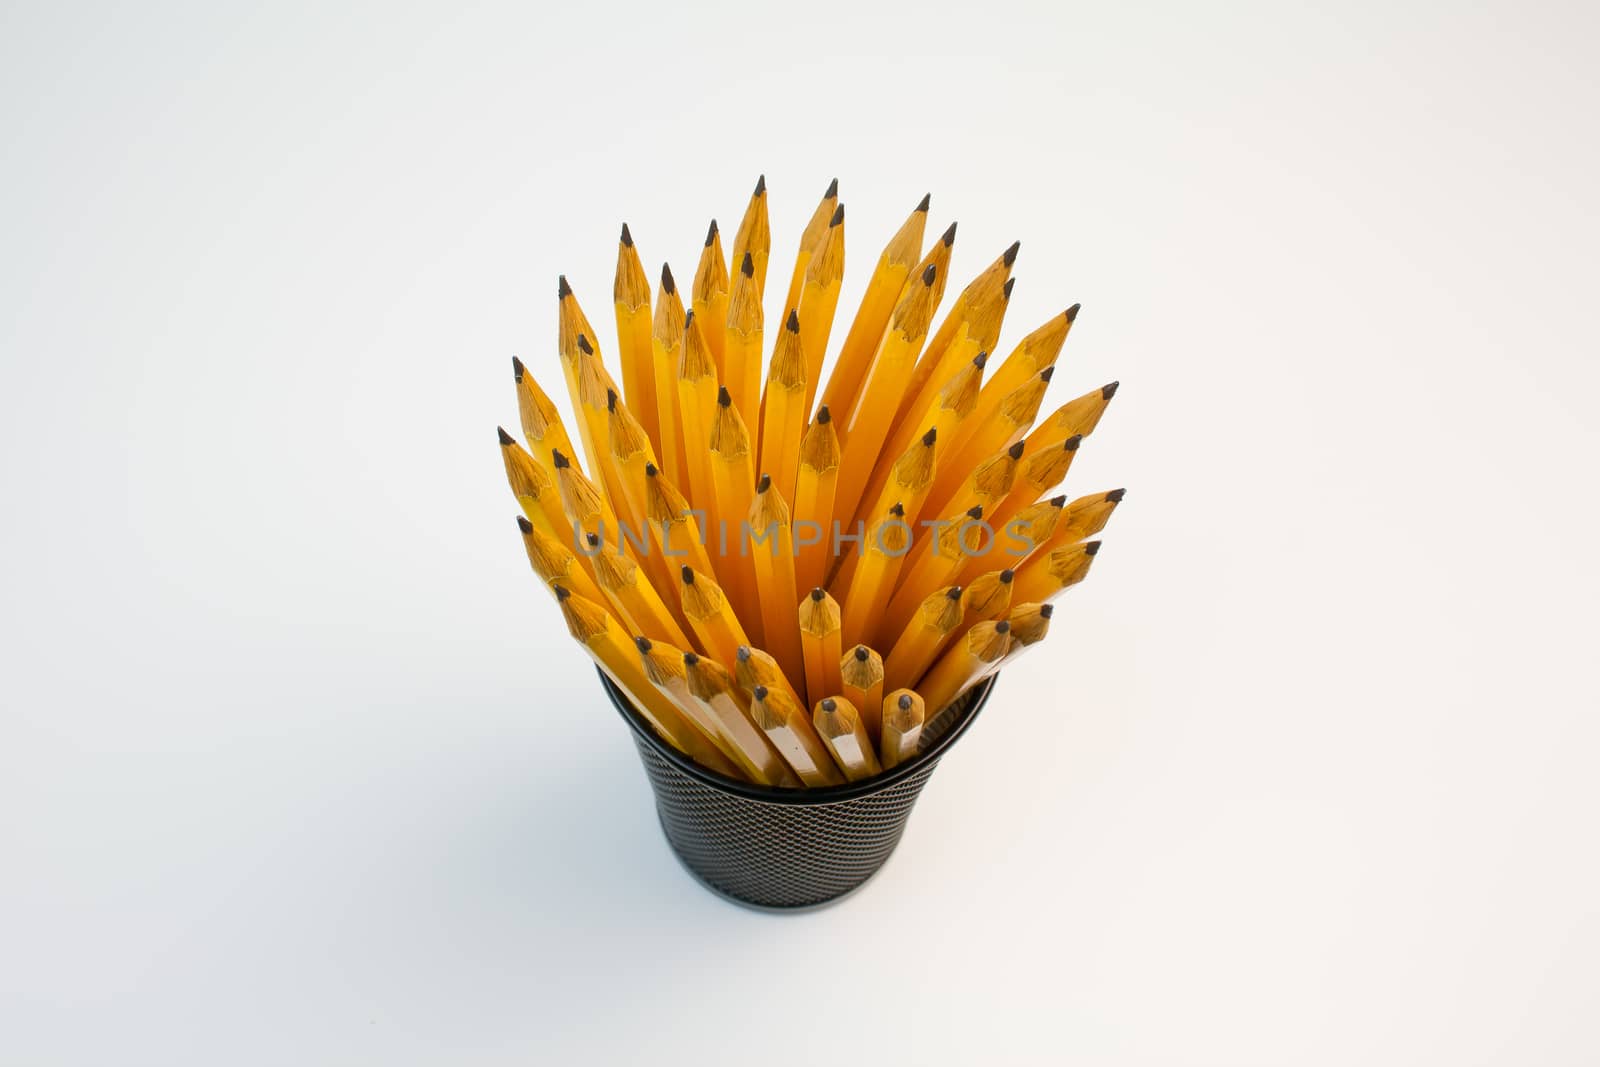 Detail view of a container filled with pencils taken in a office